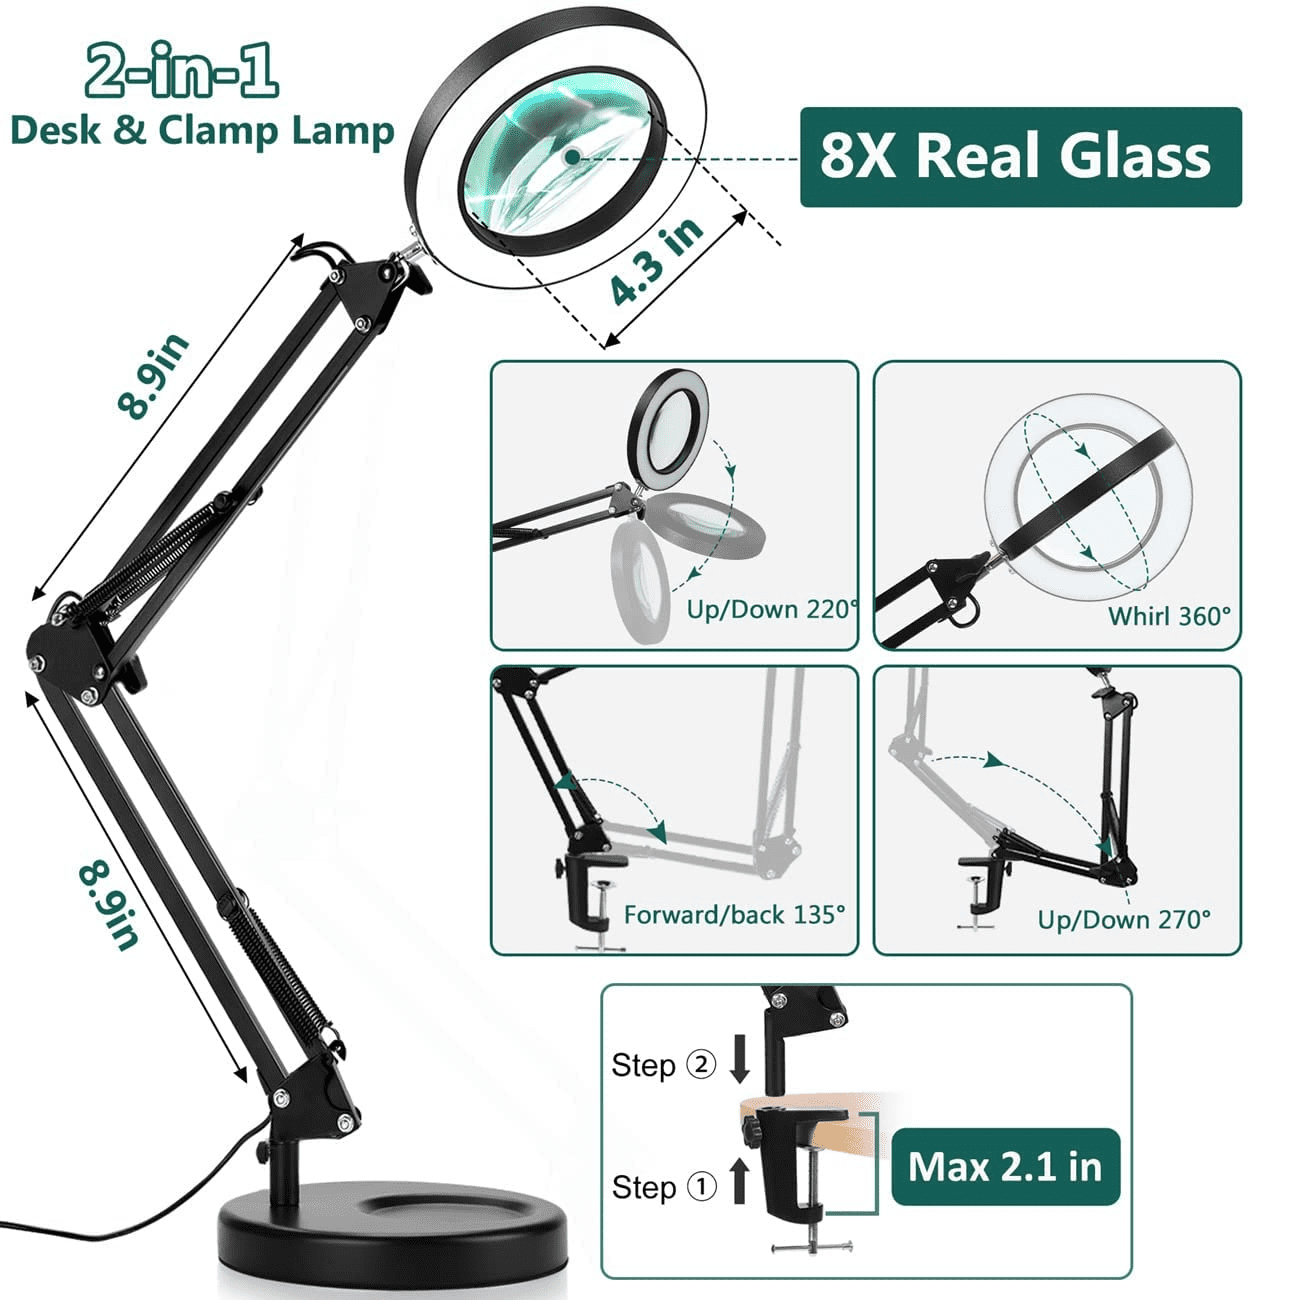 8X Desk Magnifying Glass with Light, NUEYiO 2-in-1 Heavy Duty Base&Clamp  Magnifying lamp, 4.1'' Real Glass Len, 3 Color Stepless Dimmable LED  Lighted